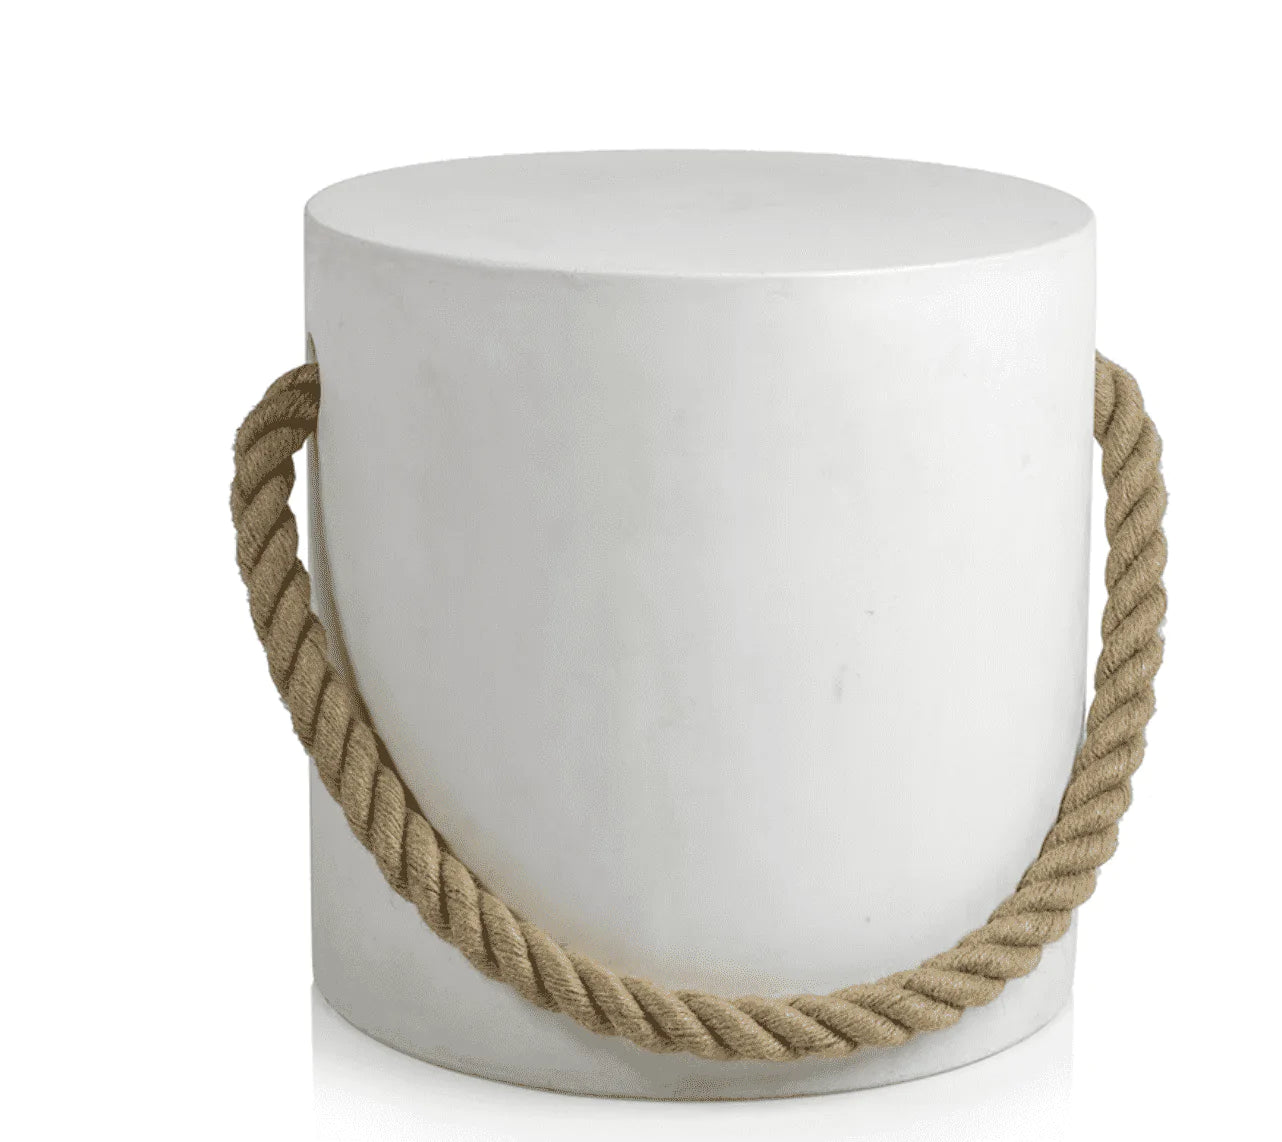 Marina Concrete Stool with Rope Accent Black + White